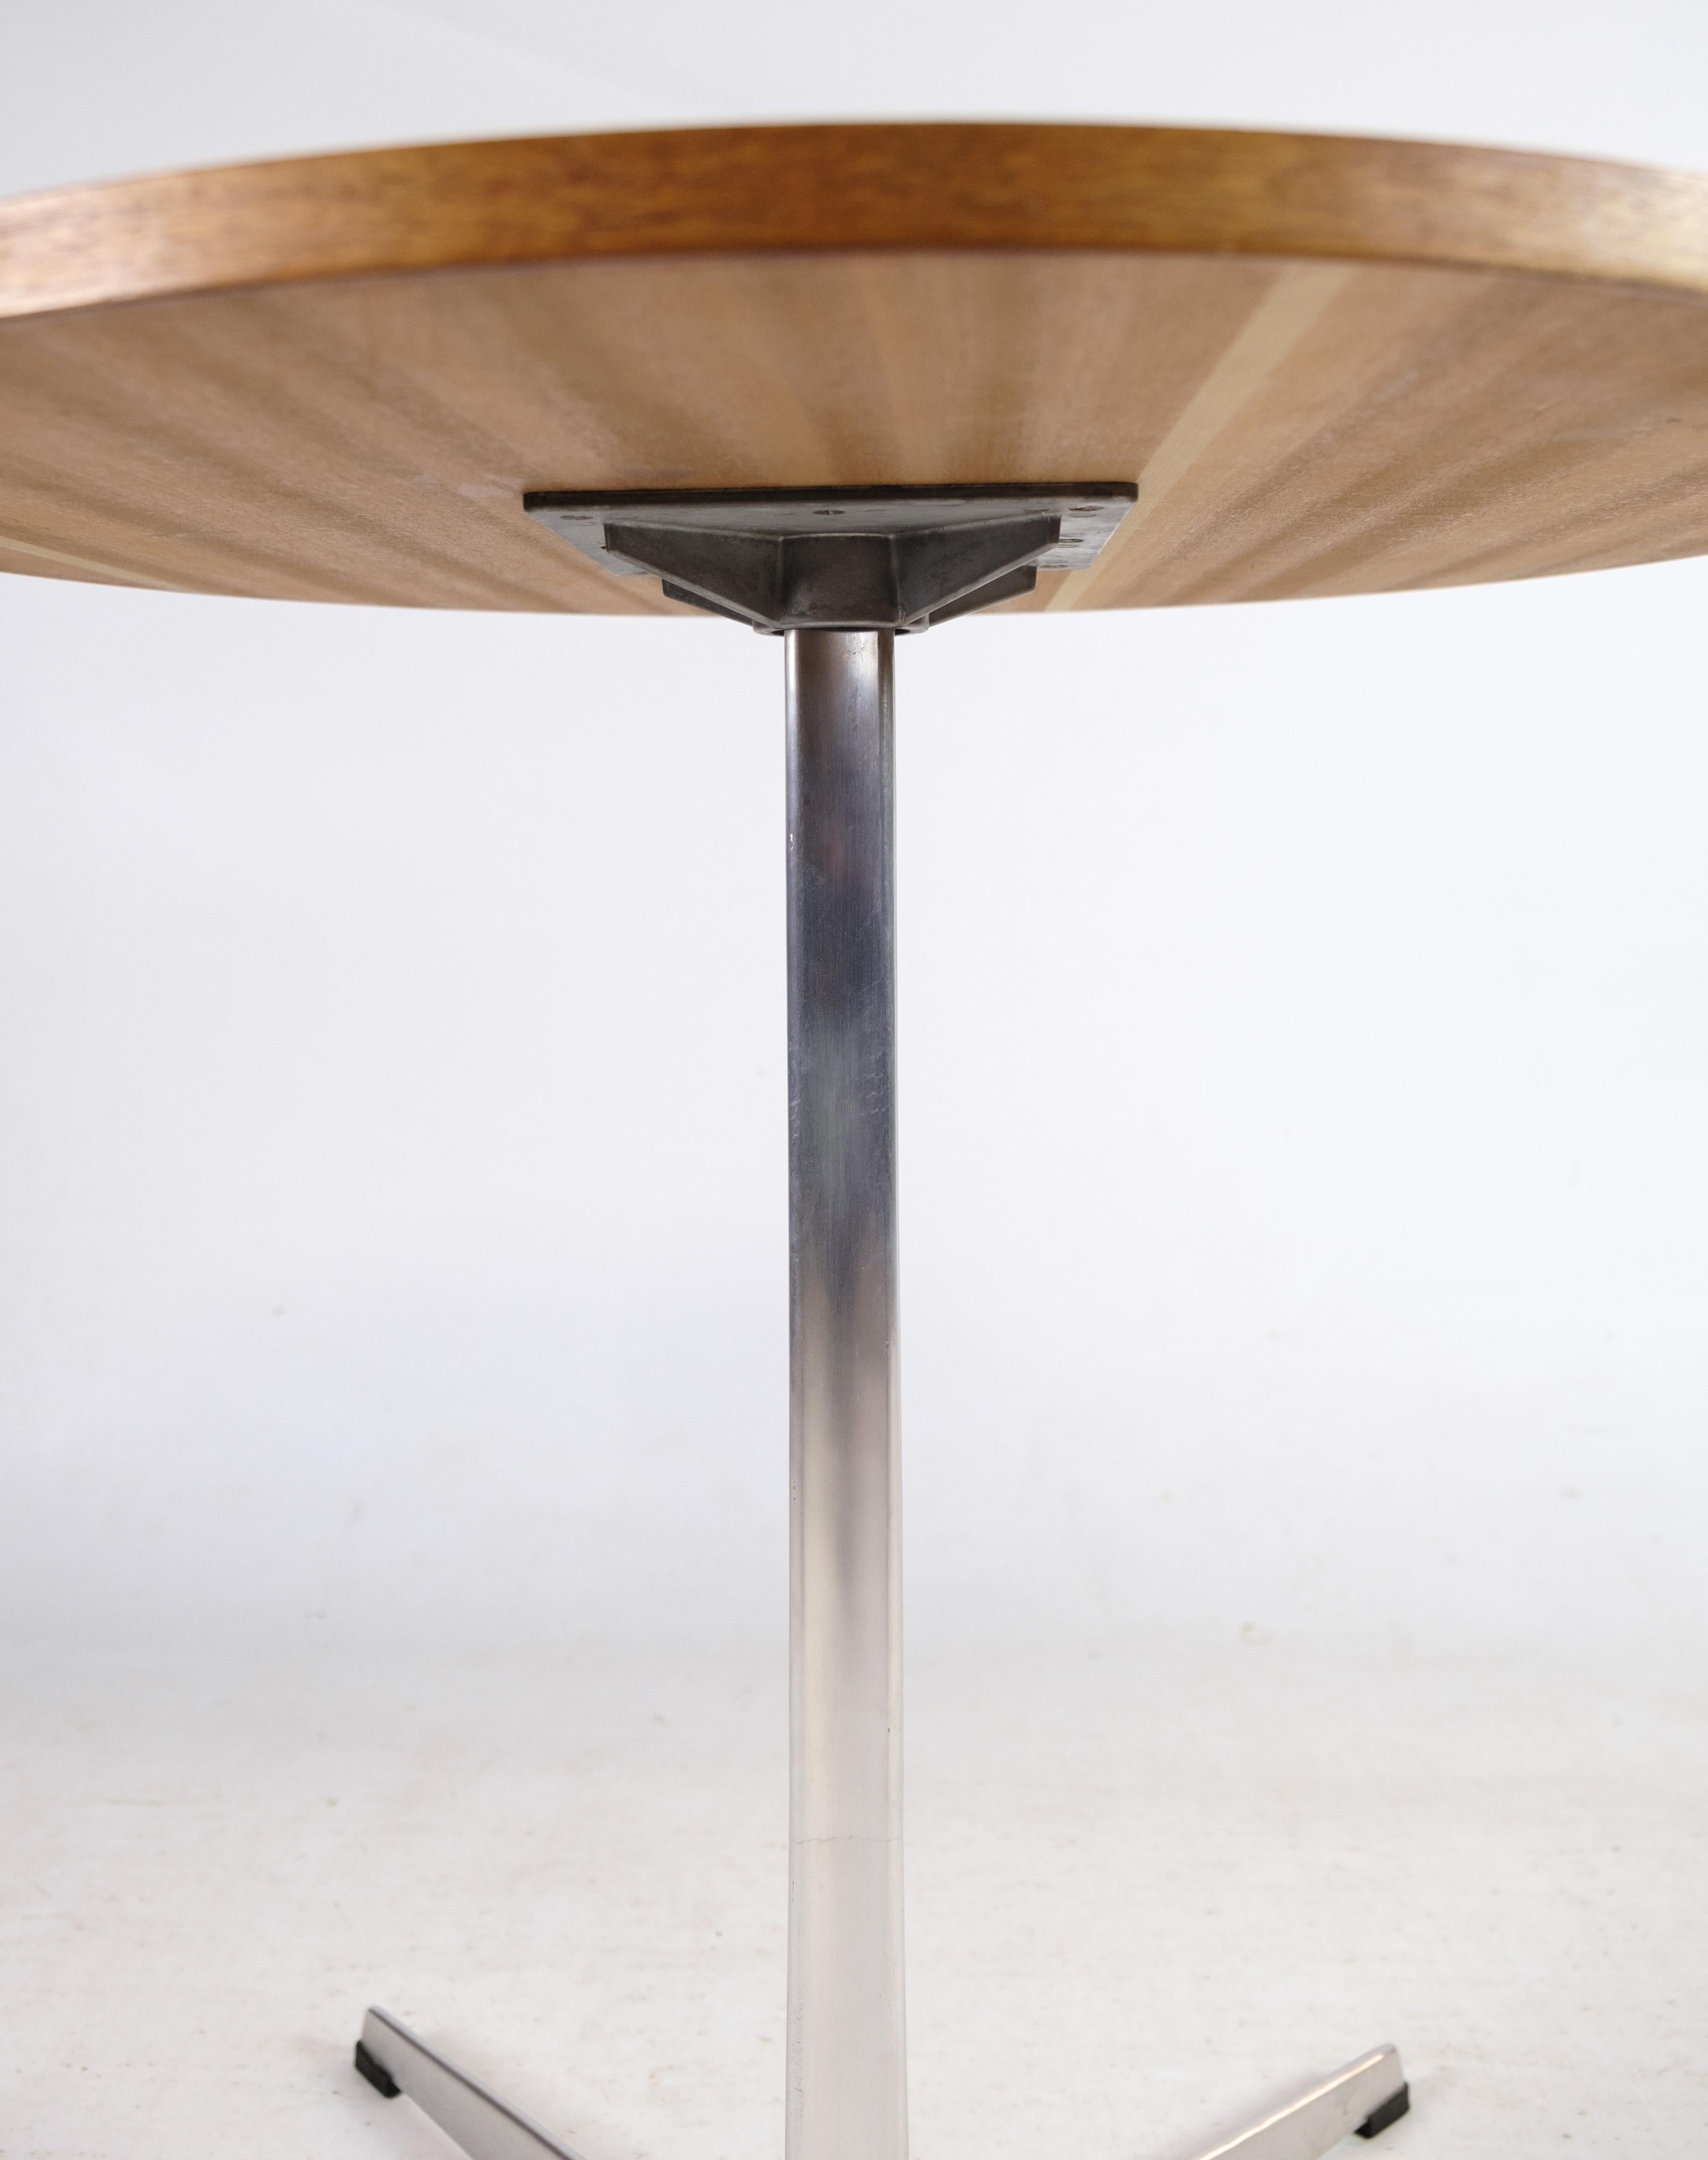 Late 20th Century Small Dining Table / Side Table, Oak, Designed by Arne Jacobsen, 1991